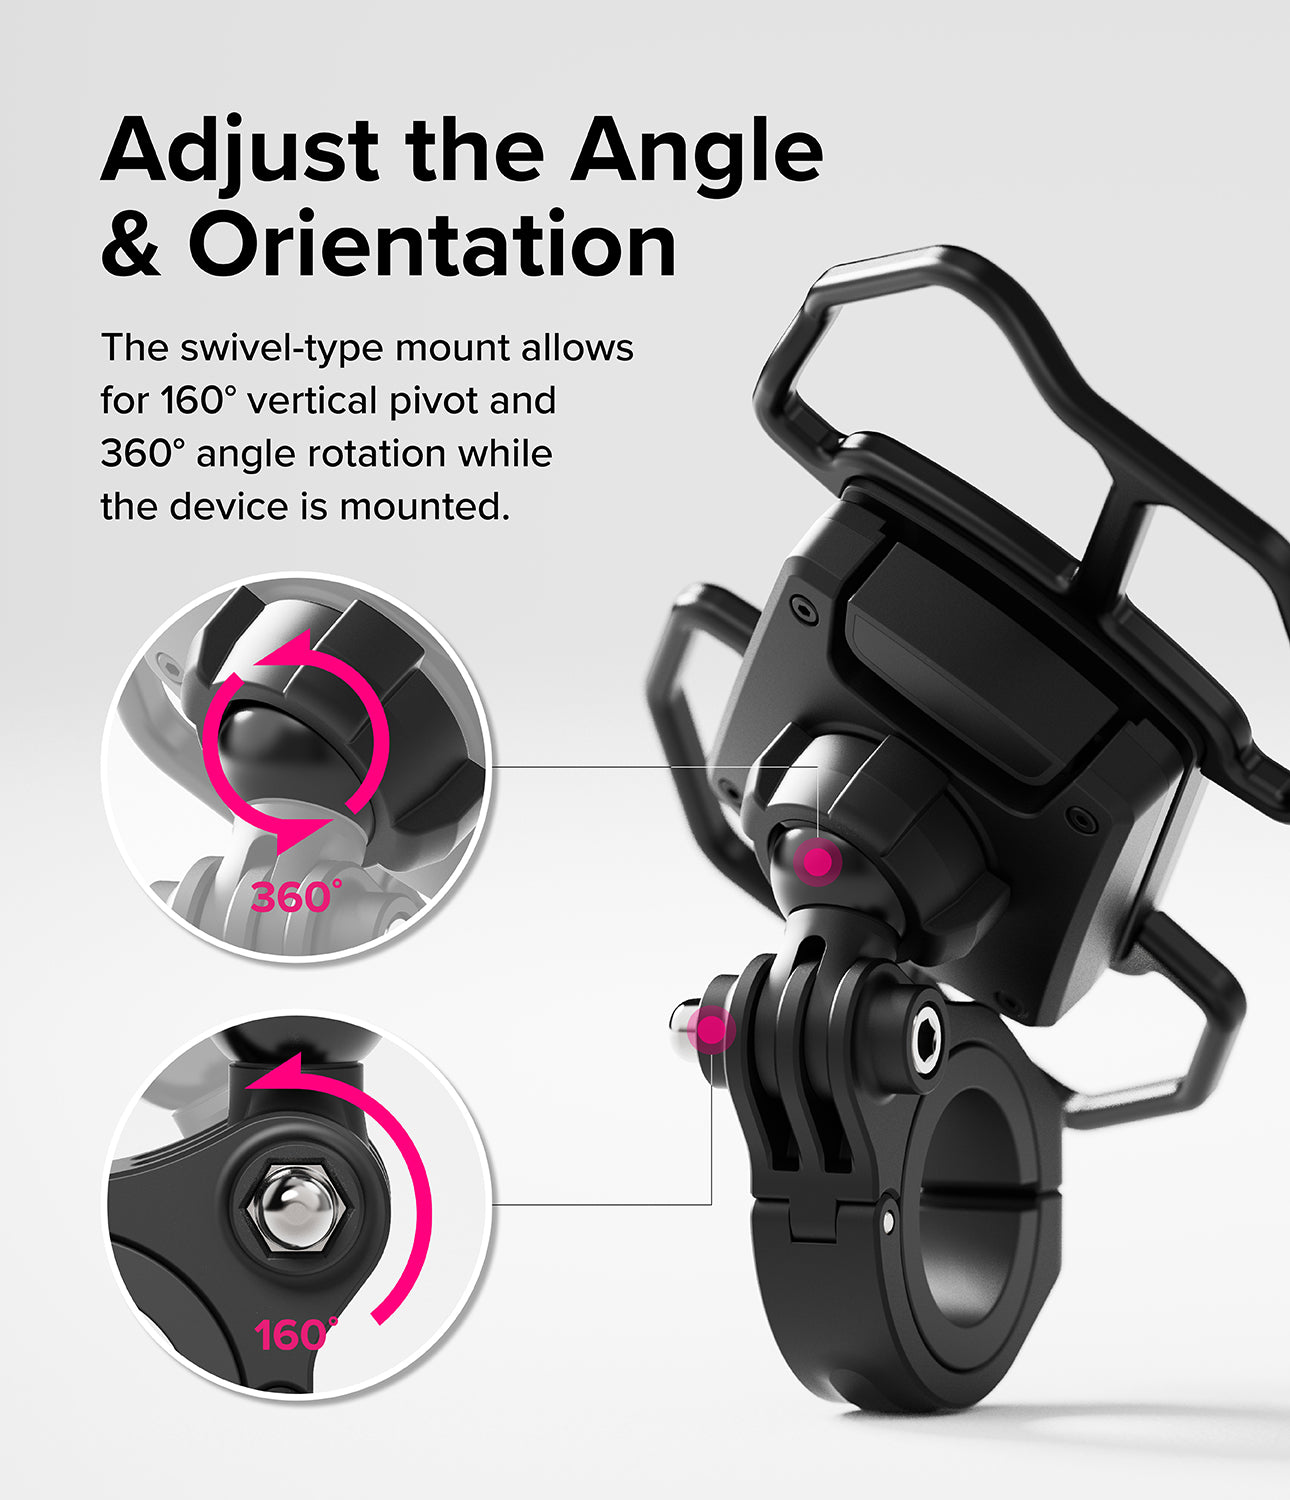 Quick & Go | Grip Bike Mount - Adjust the Angle and Orientation. The swivel-type mount allows for 160 degrees vertical pivot and 360 degrees angle rotation while the device is mounted.